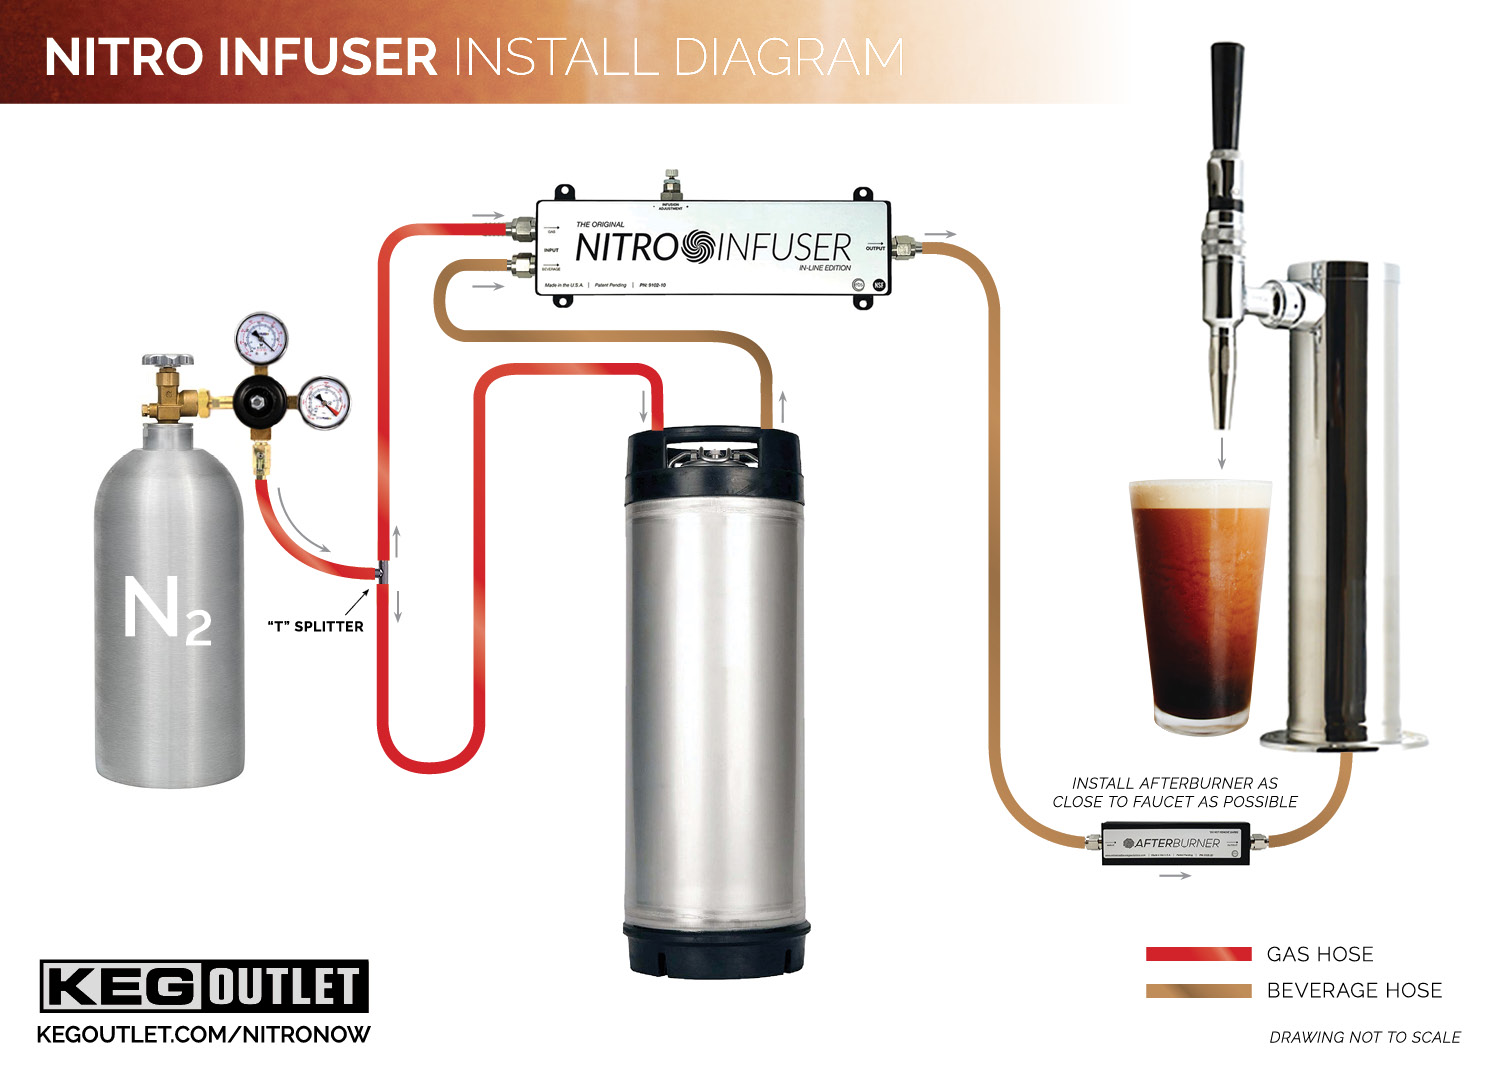 Nitro Infuser with AfterBurner Installation Diagram